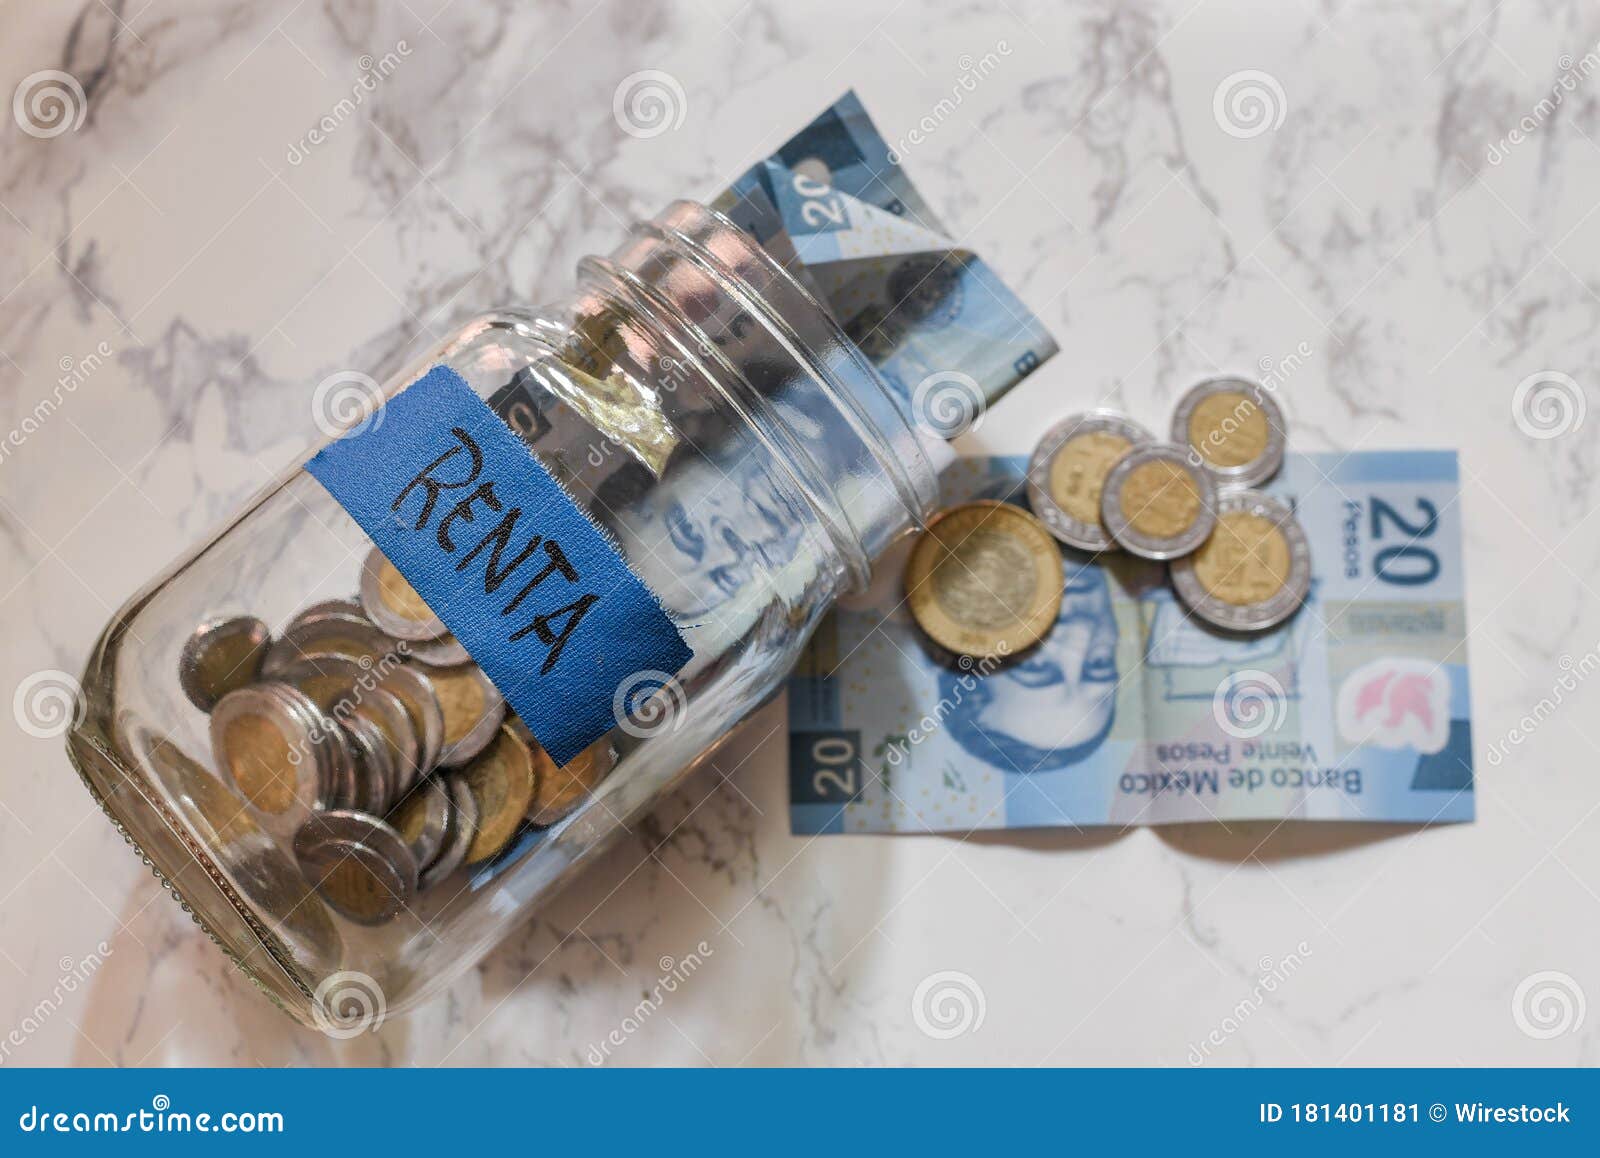 high angle view of pesos and coins in a jar with a blue [renta-rent] sticker on it on the table